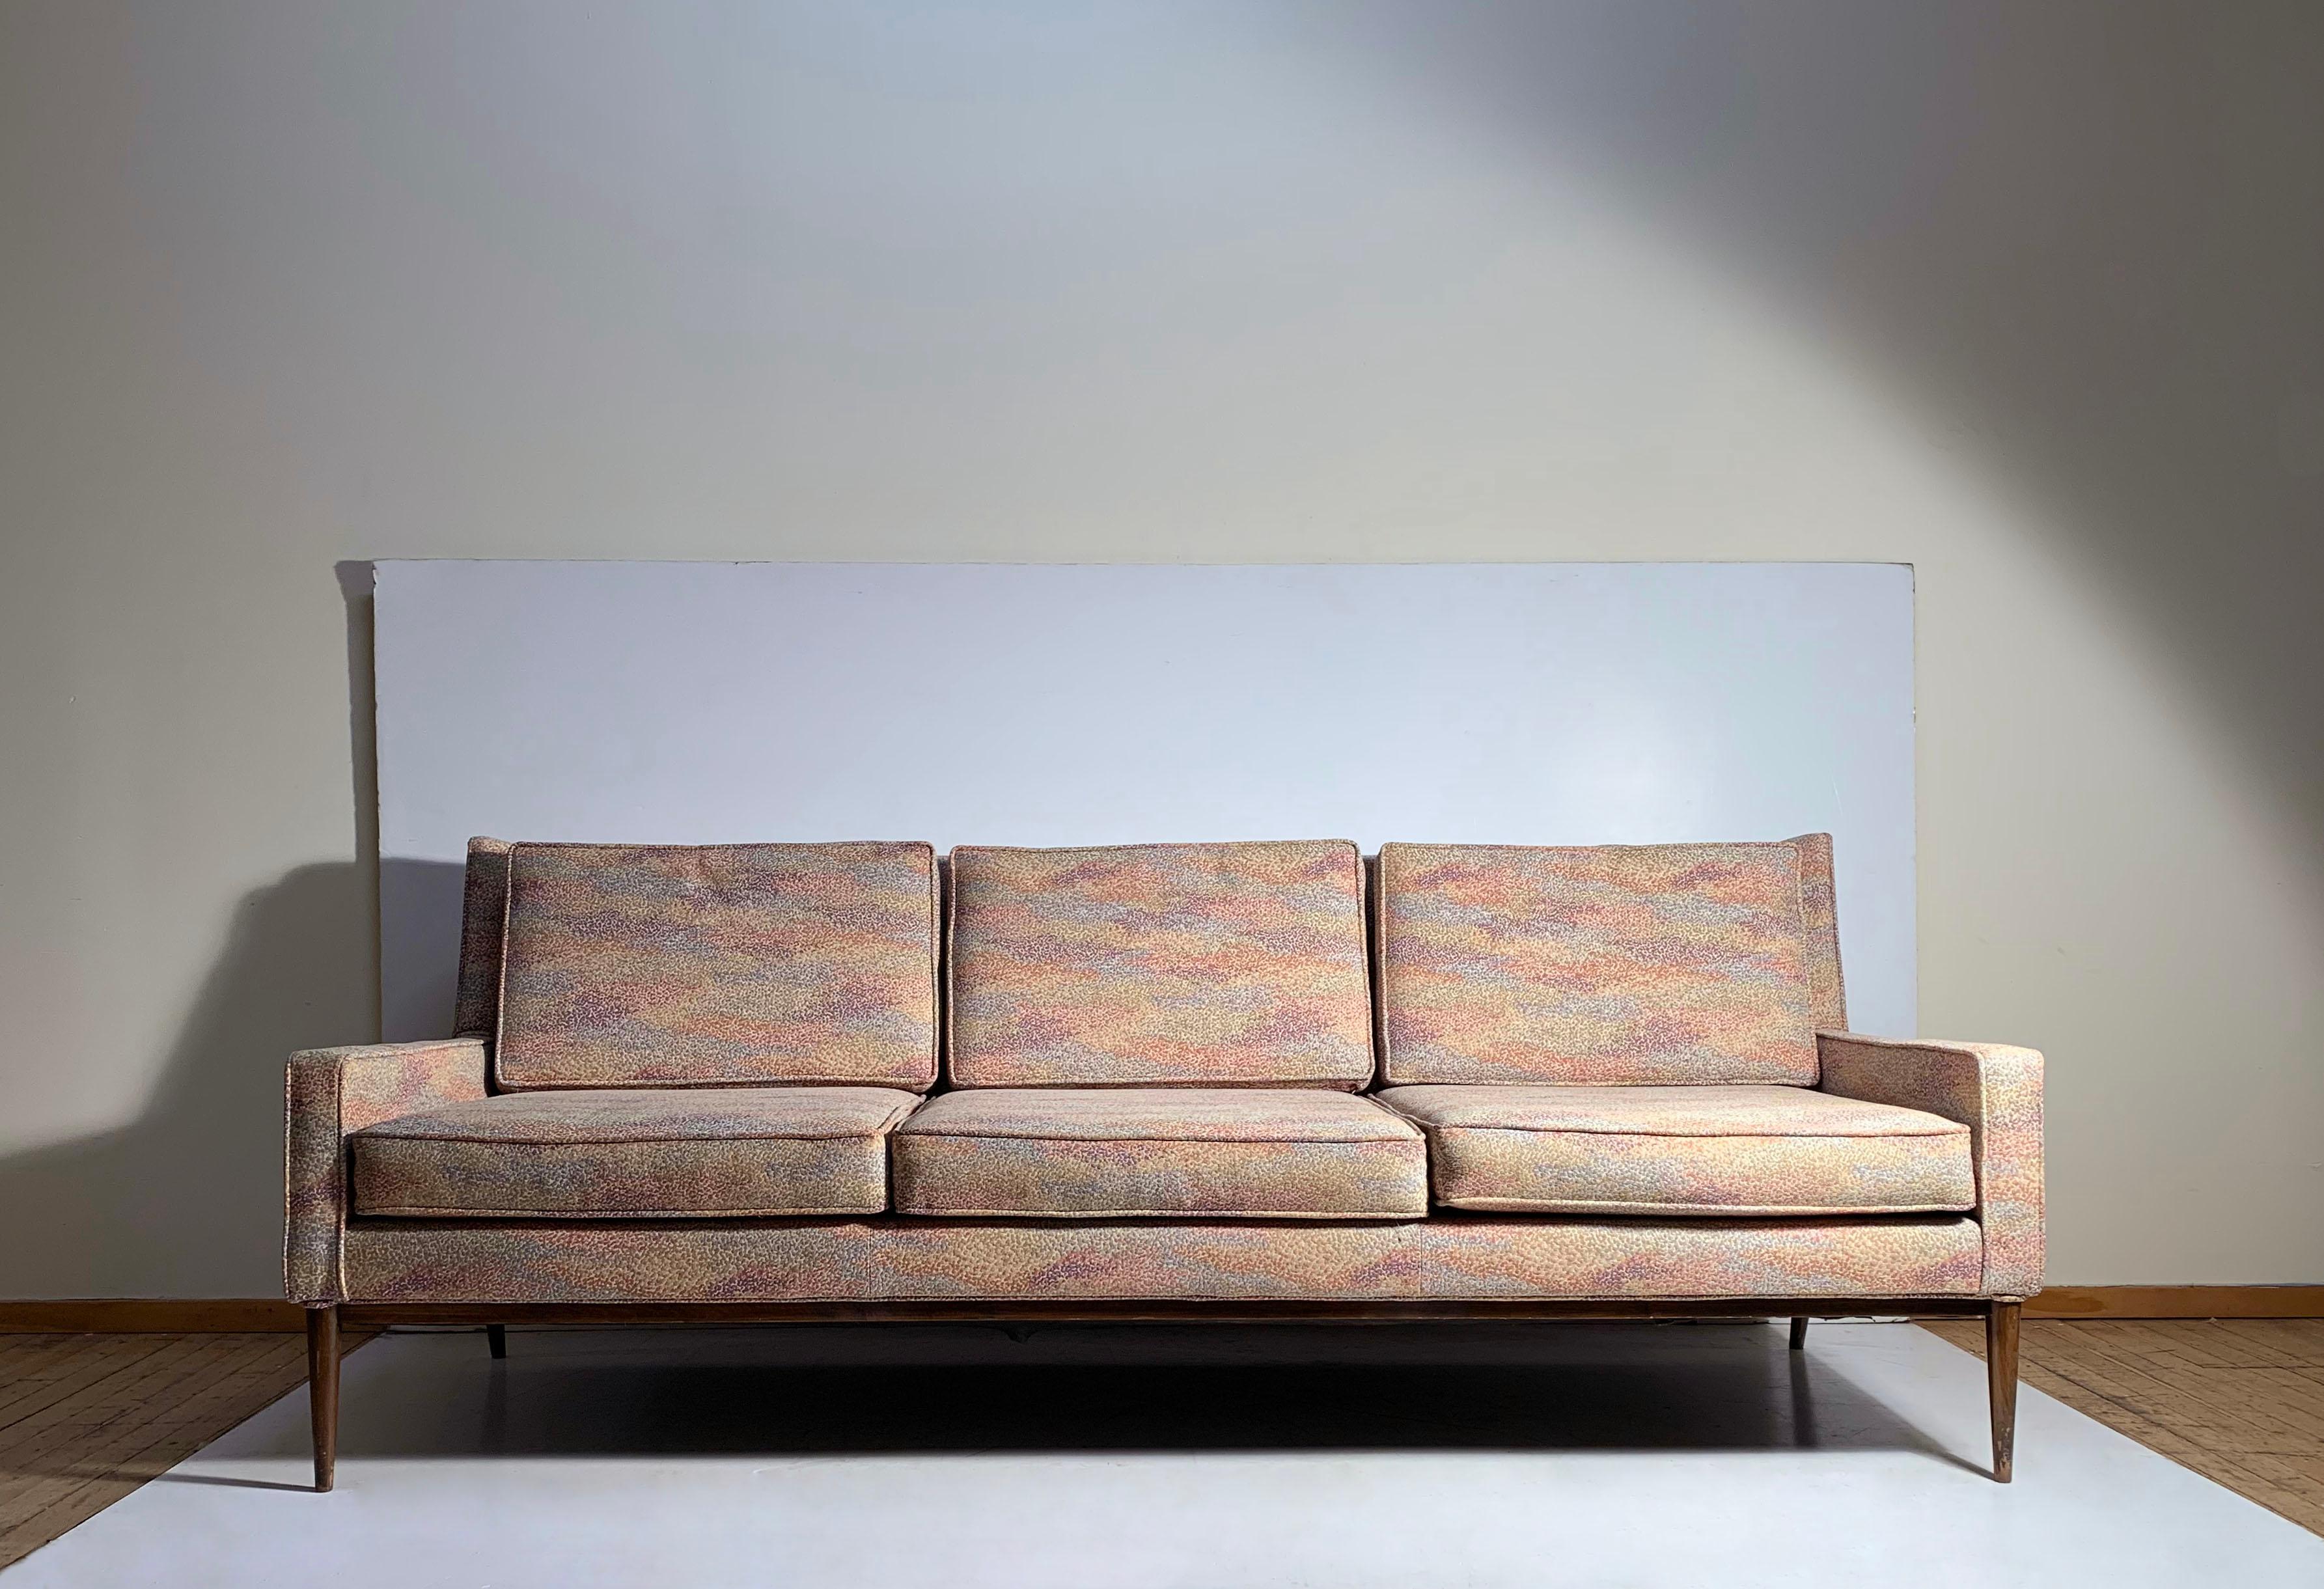 Vintage Paul McCobb sofa for Directional

reupholstered at one point. In pretty nice condition with fabric being usable as-is. minor wear. 

finish to wood and legs shows some wear.

